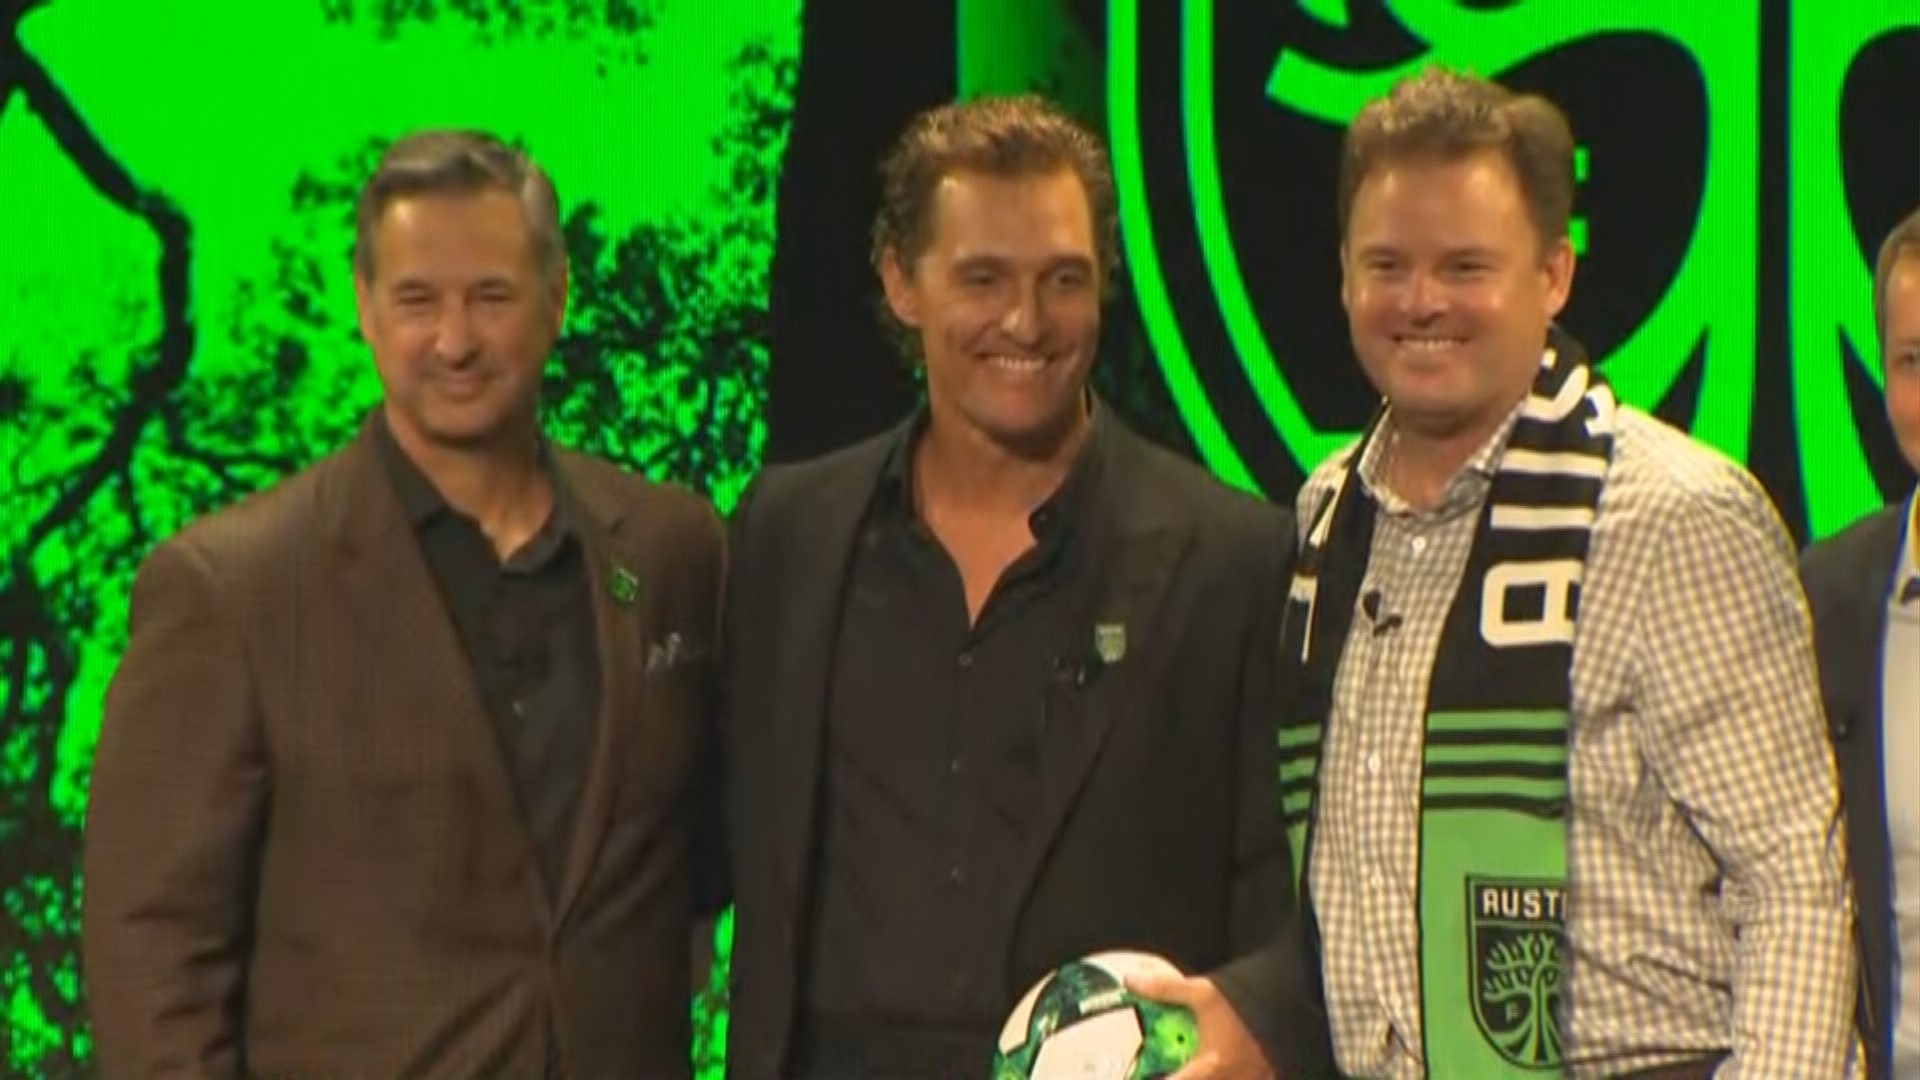 Austin FC and Two Oak Ventures CEO, Anthony Precourt, held a press conference Friday to announce the new members of Austin FC's investor group and McConaughey was named one.